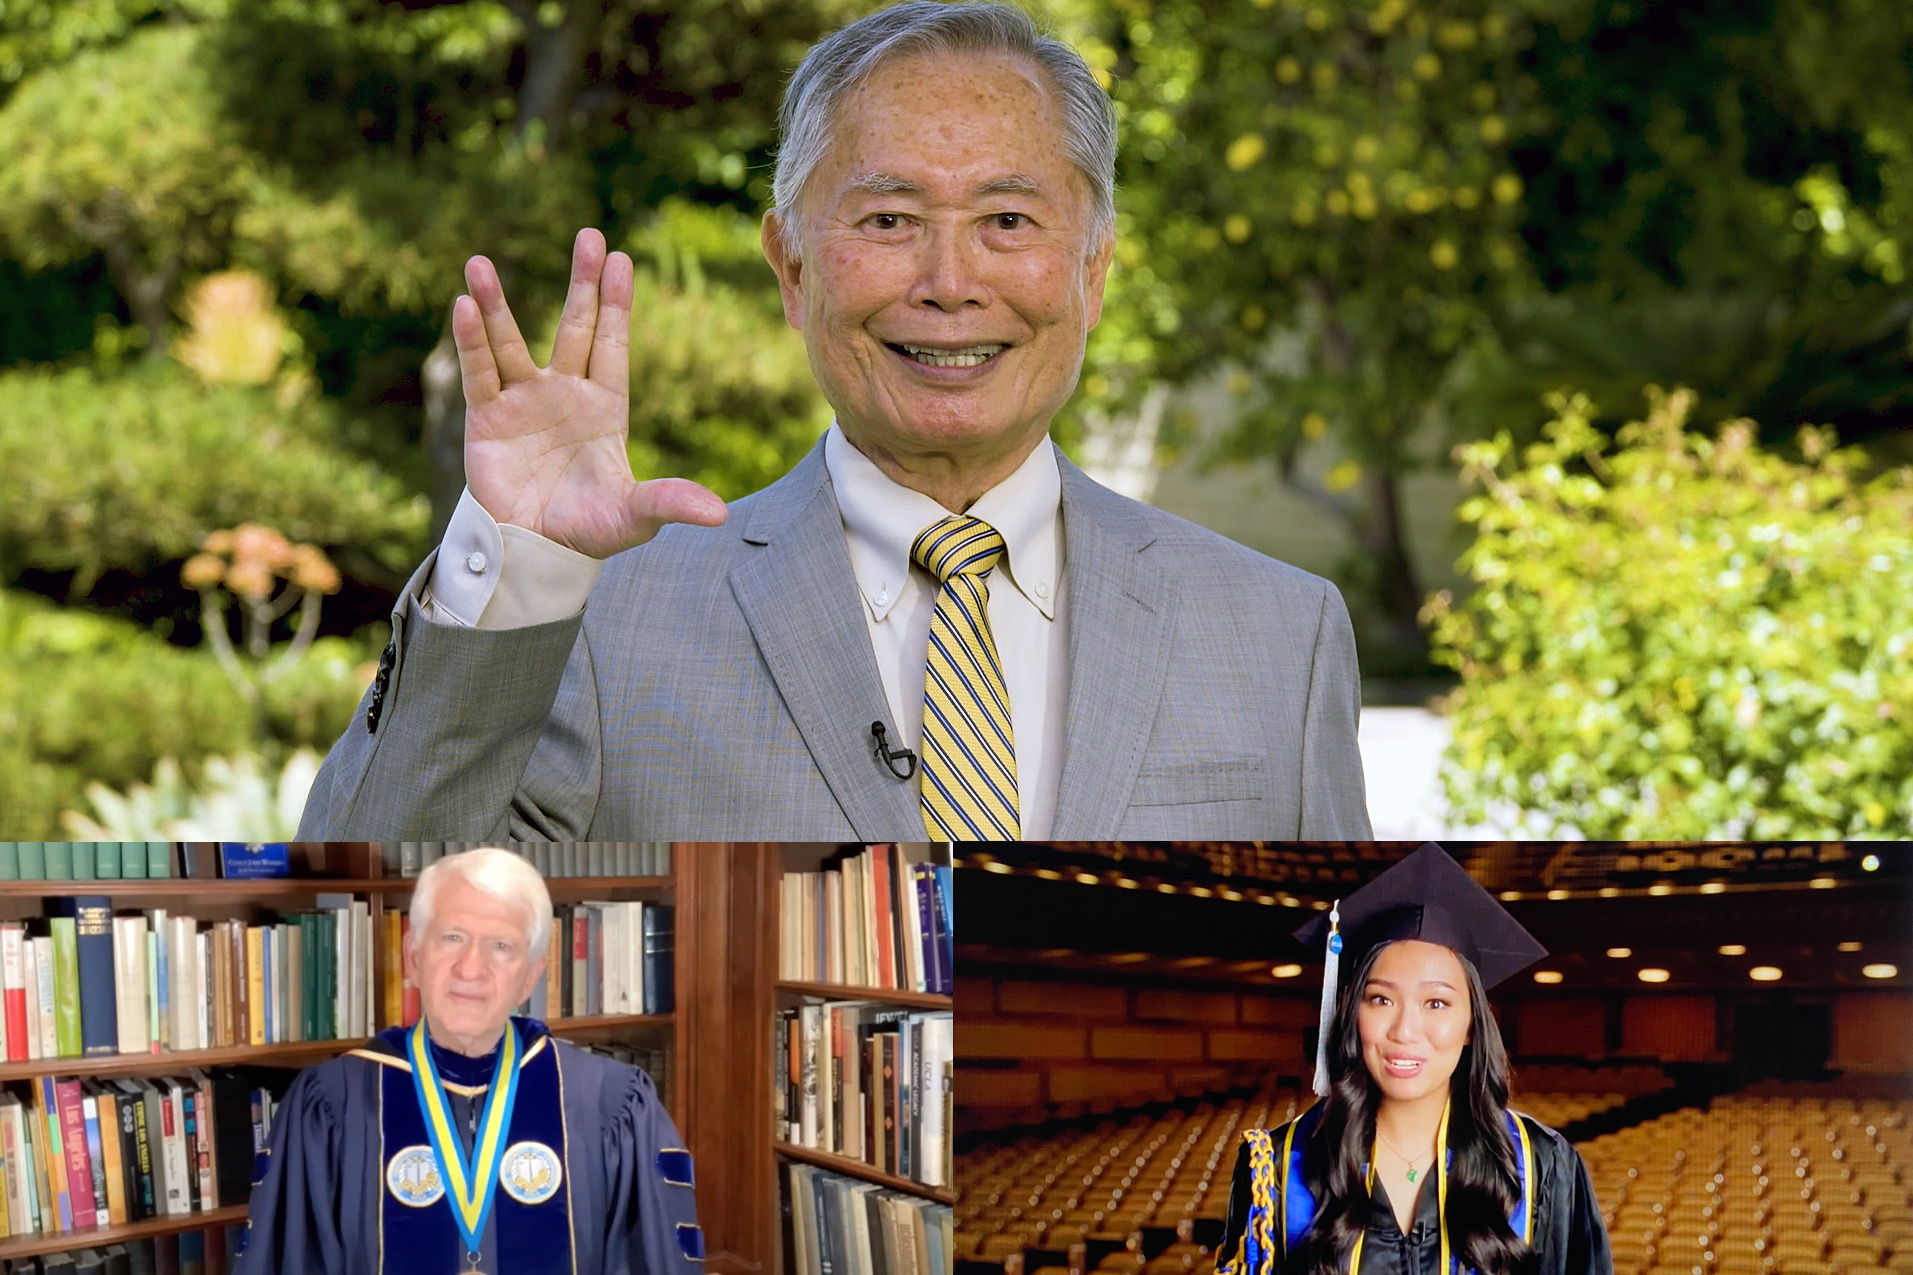 Photo collage: Top, a grey-haired man raises his palm forward in the Vulcan salute; greenery behind him. Lower left, Chancellor Block in blue regalia; bookshelves behind him. Lower right, a woman with long hair in a black graduation gown; empty theatre seats behind her.